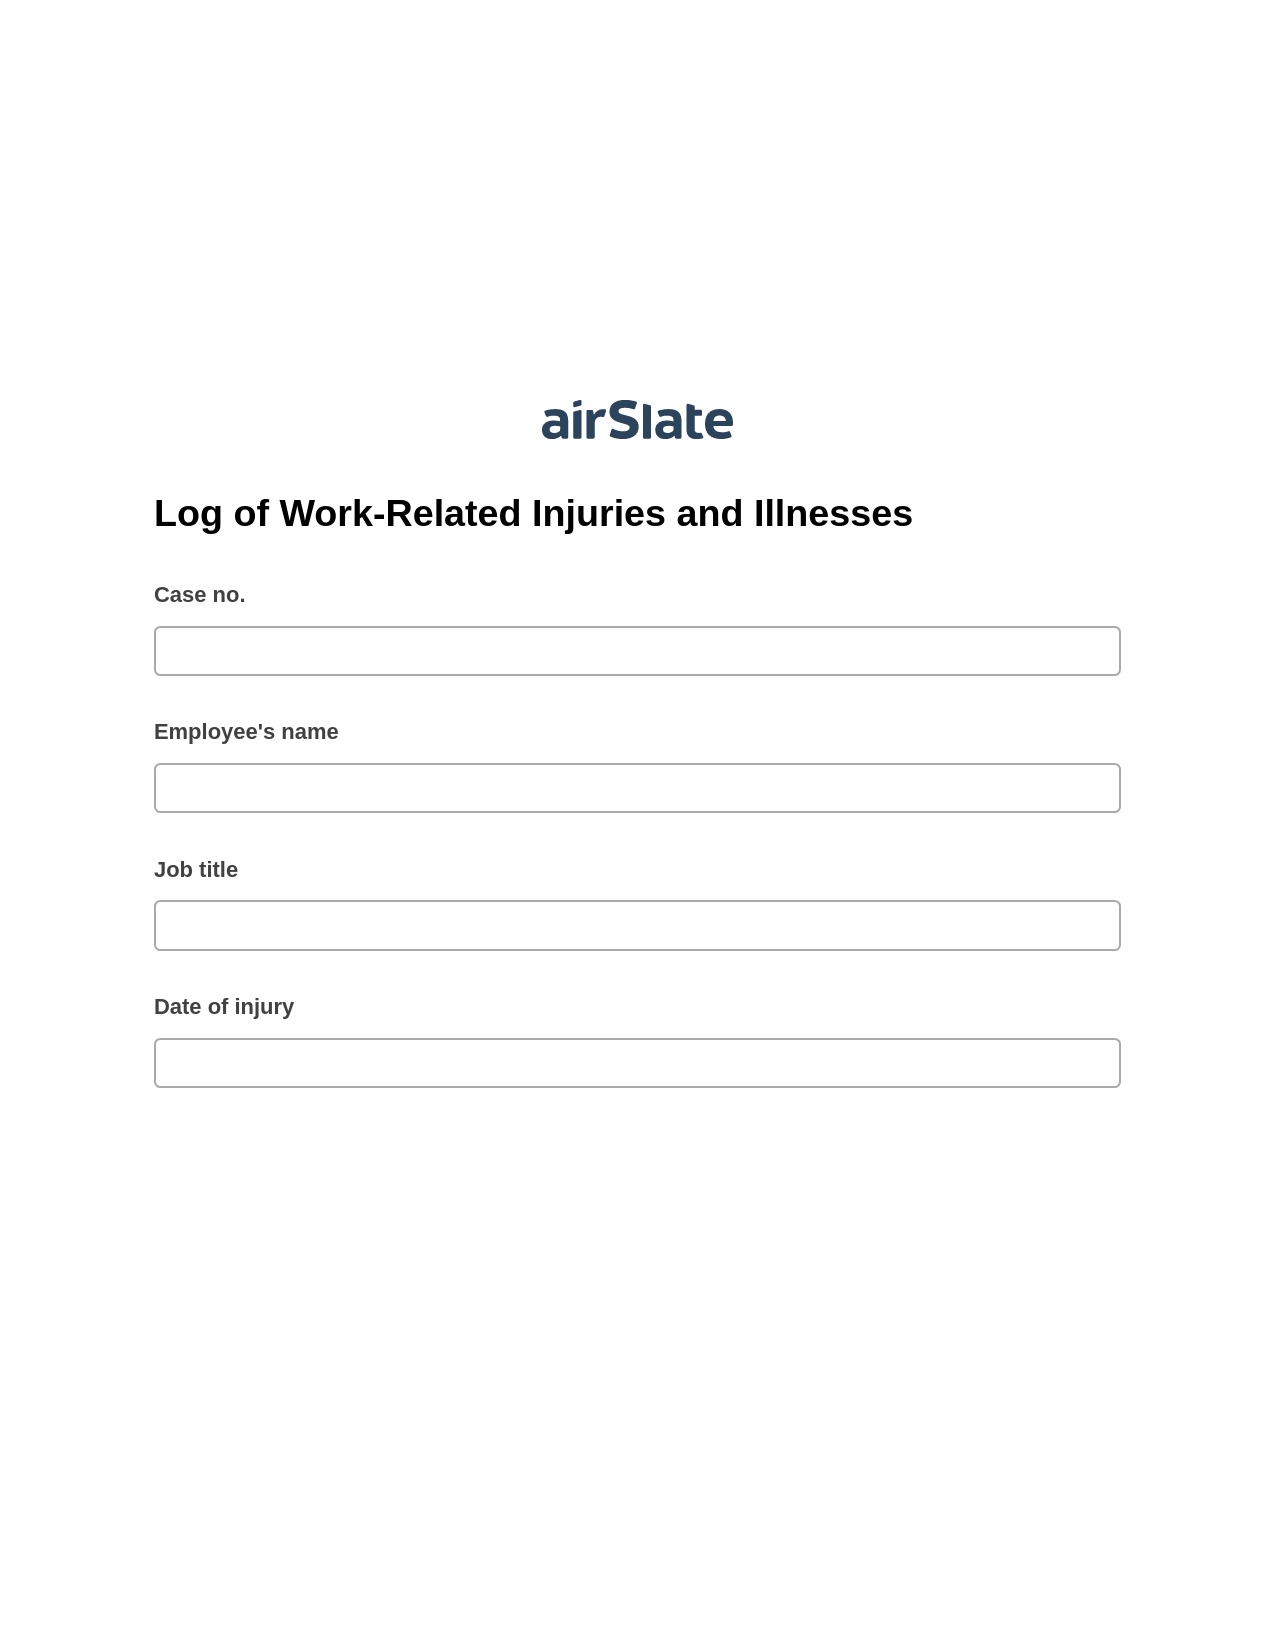 Multirole Log of Work-Related Injuries and Illnesses Pre-fill Slate from MS Dynamics 365 Records Bot, Google Calendar Bot, Export to Excel 365 Bot